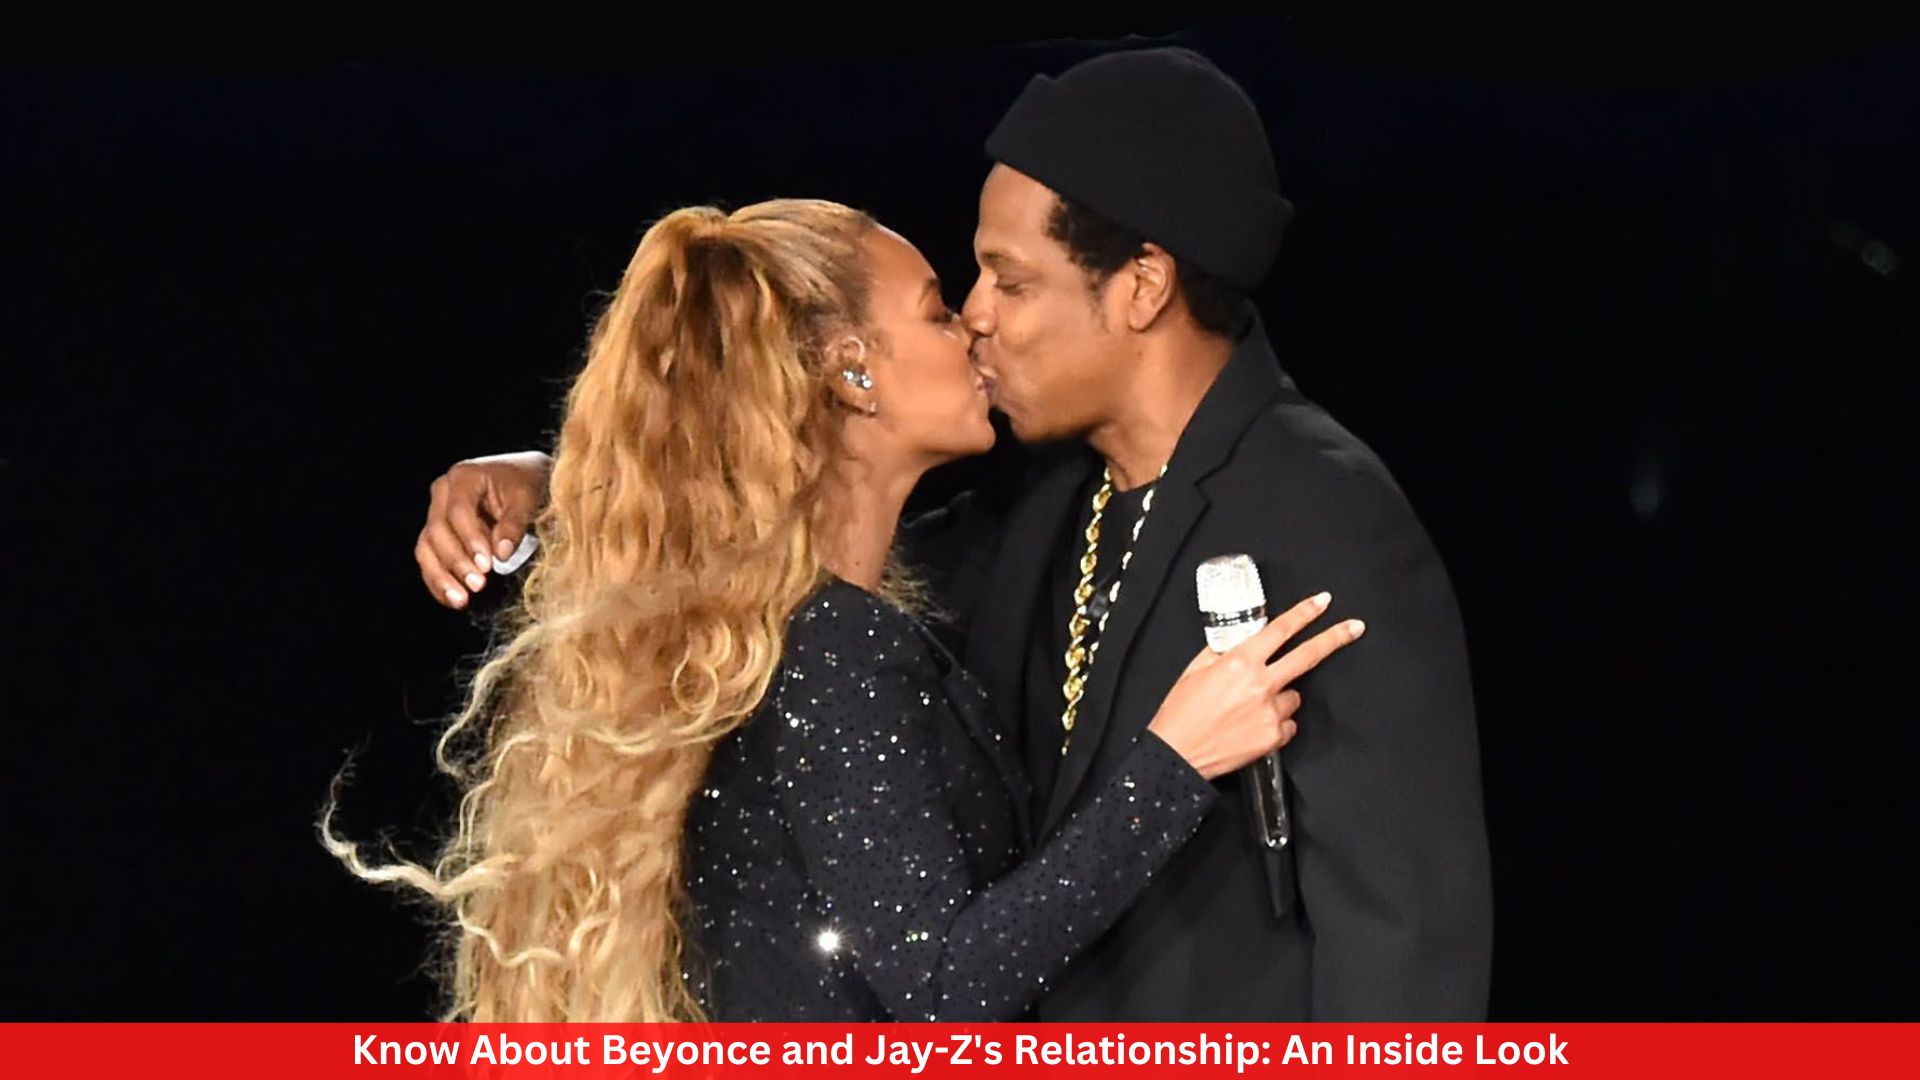 Know About Beyonce and Jay-Z's Relationship: An Inside Look